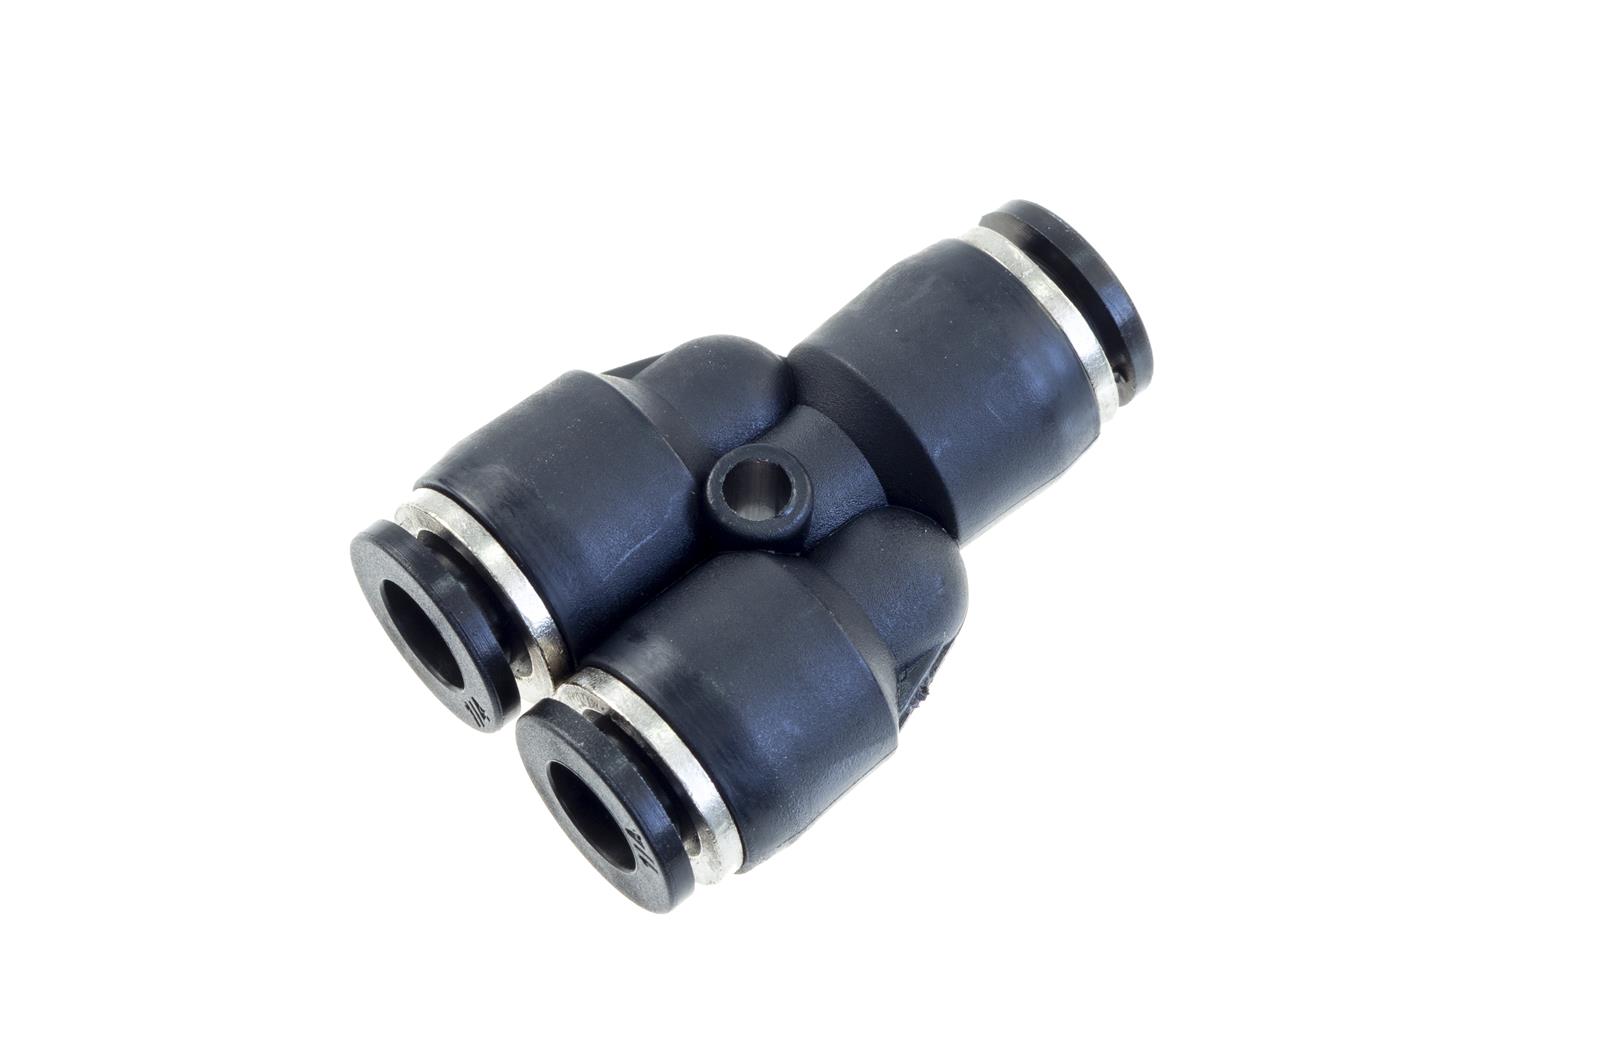 Redhorse Performance 4730-06-06-2 3/8in Vacuum Fitting Y Union (3/8in to 3/8in), Push To Connect - black